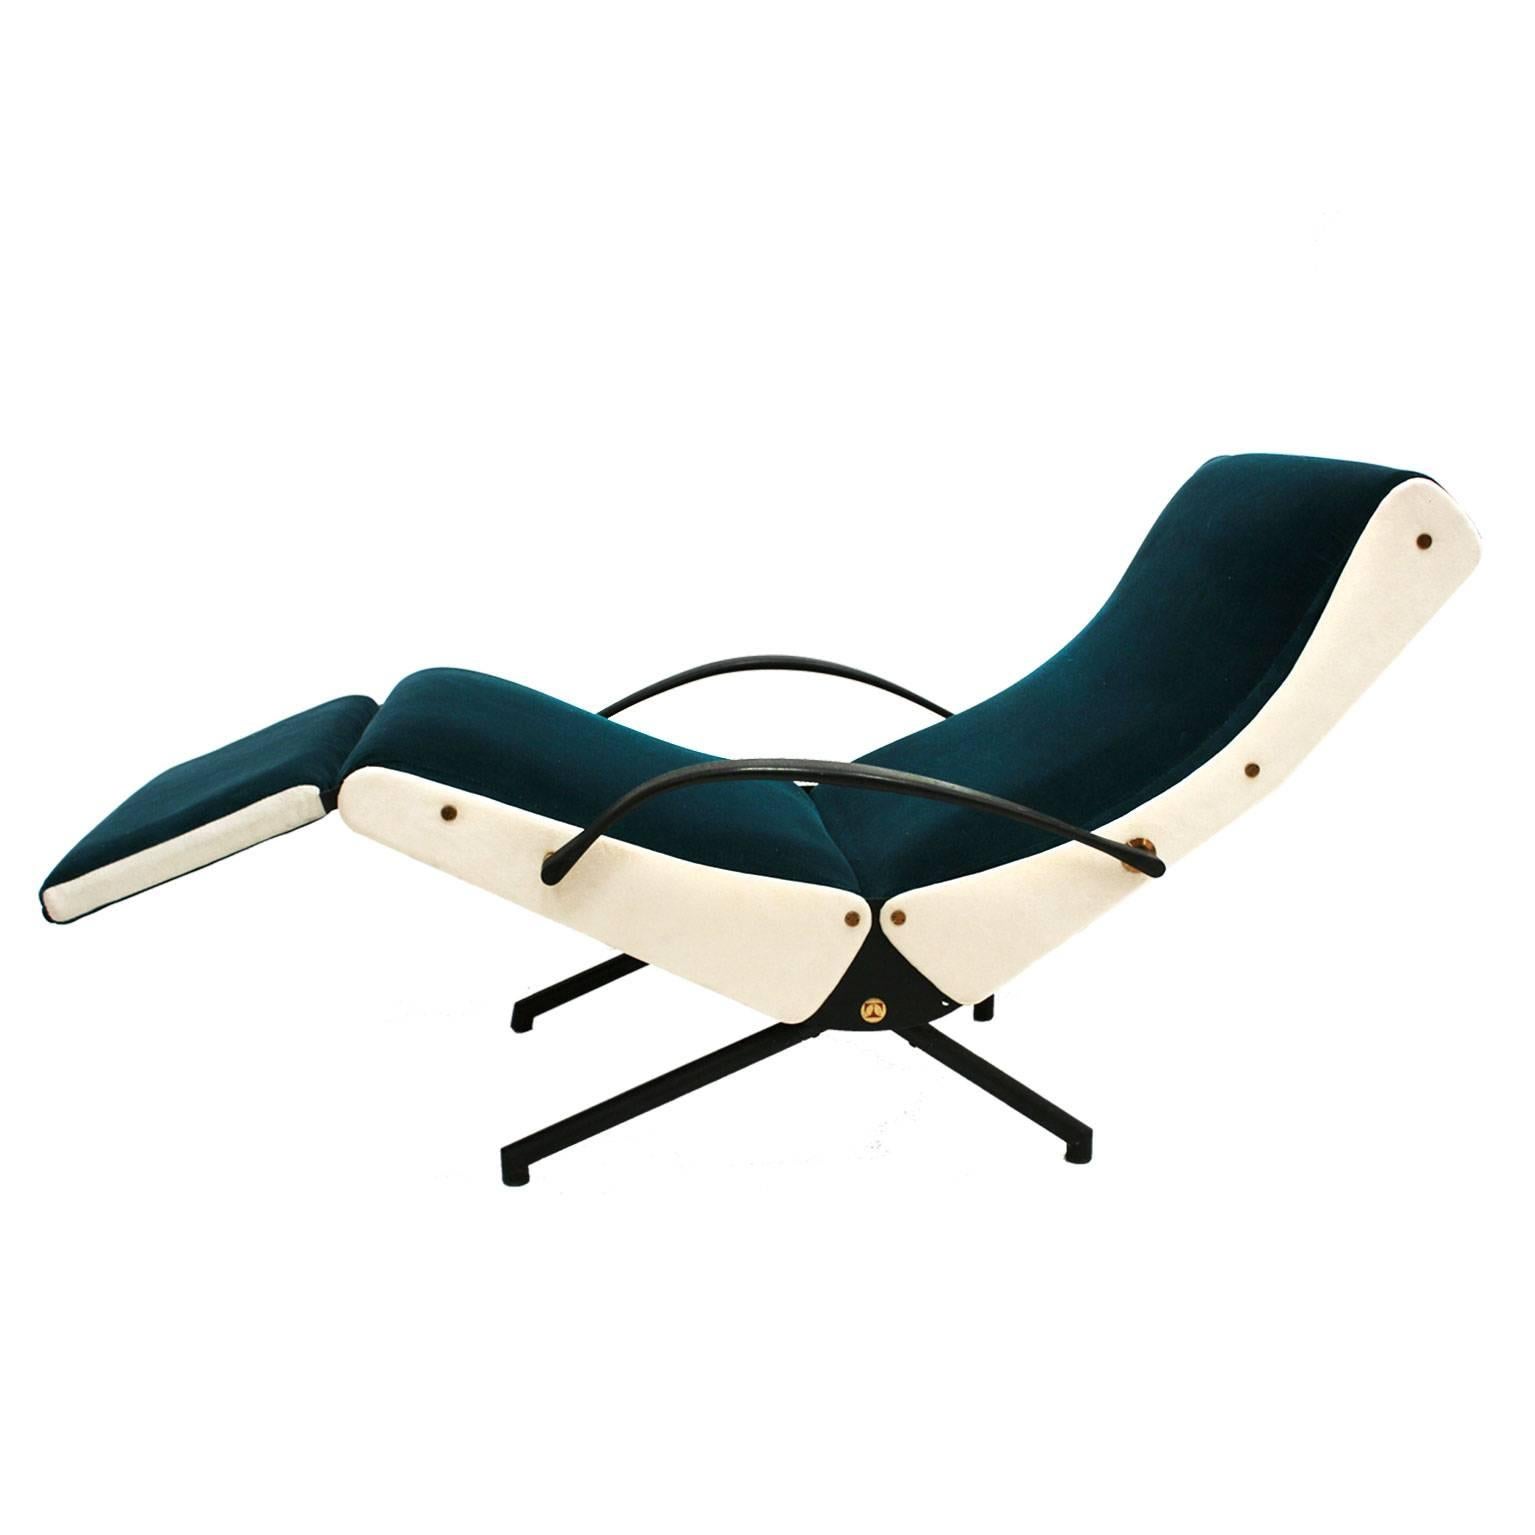 Lounge chair model P40 designed by Osvaldo Borsani for Tecno in 1950.
Structure made in steel with brass details, new upholstery in cotton velvet and nappa. Rubber armrests. It can be adjusted to different positions.
Markings include [T] hallmark